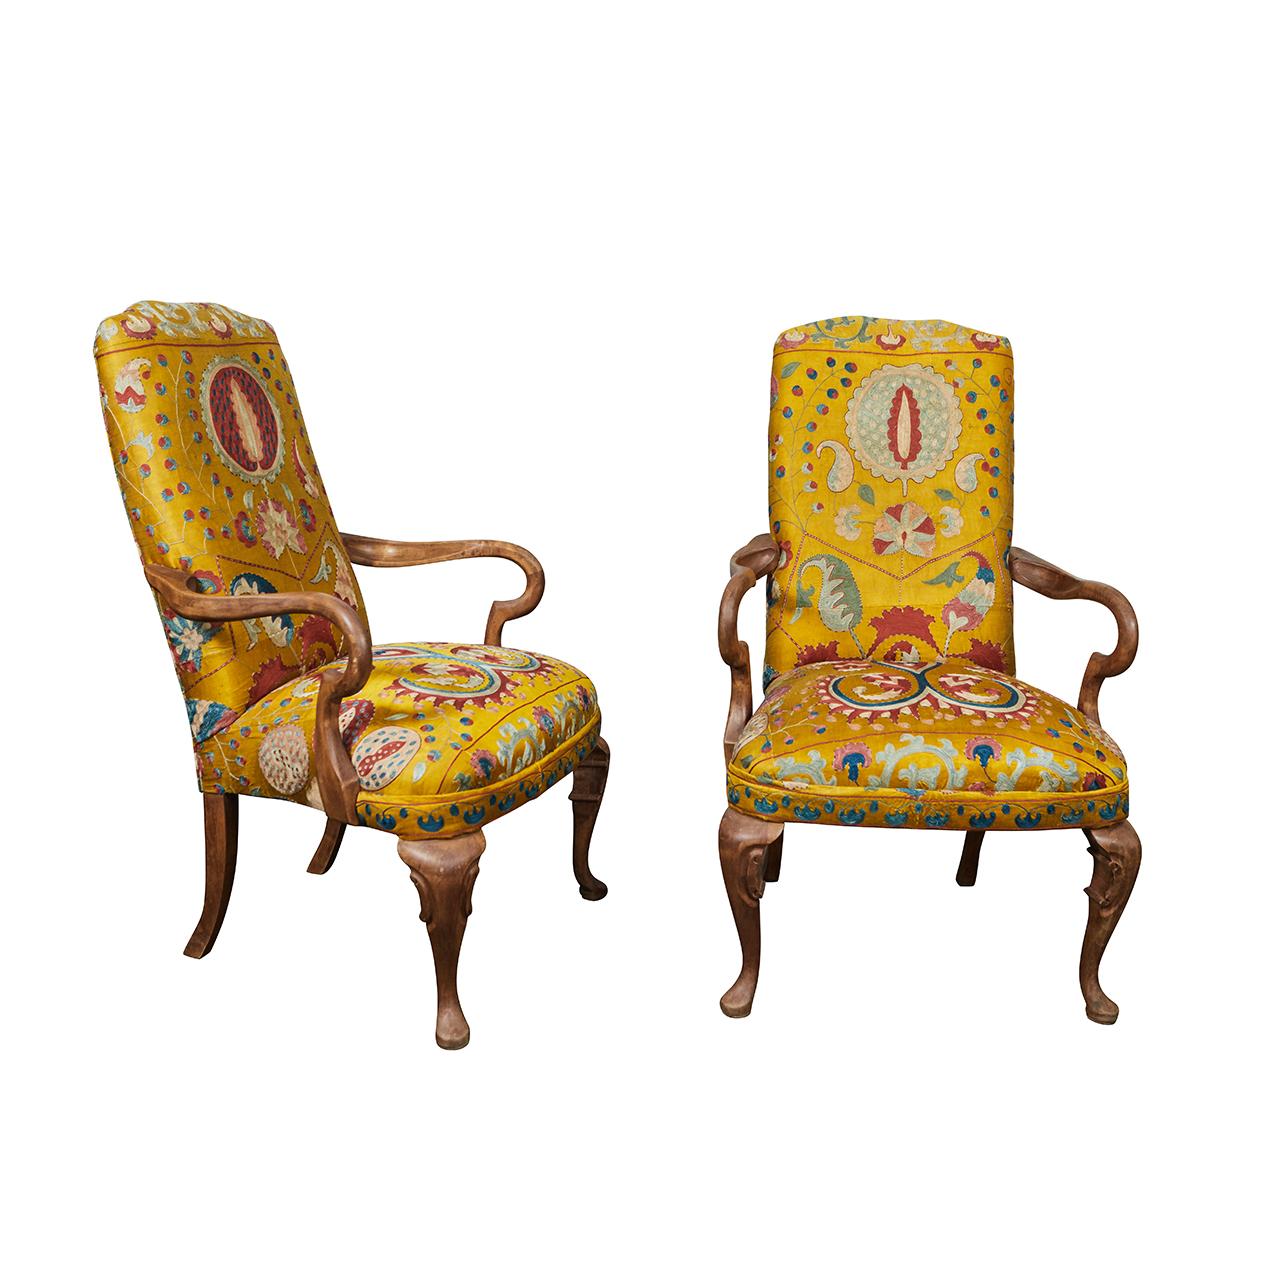 Pair of Yellow Embroidered Silk Queen Ann Style Armchairs